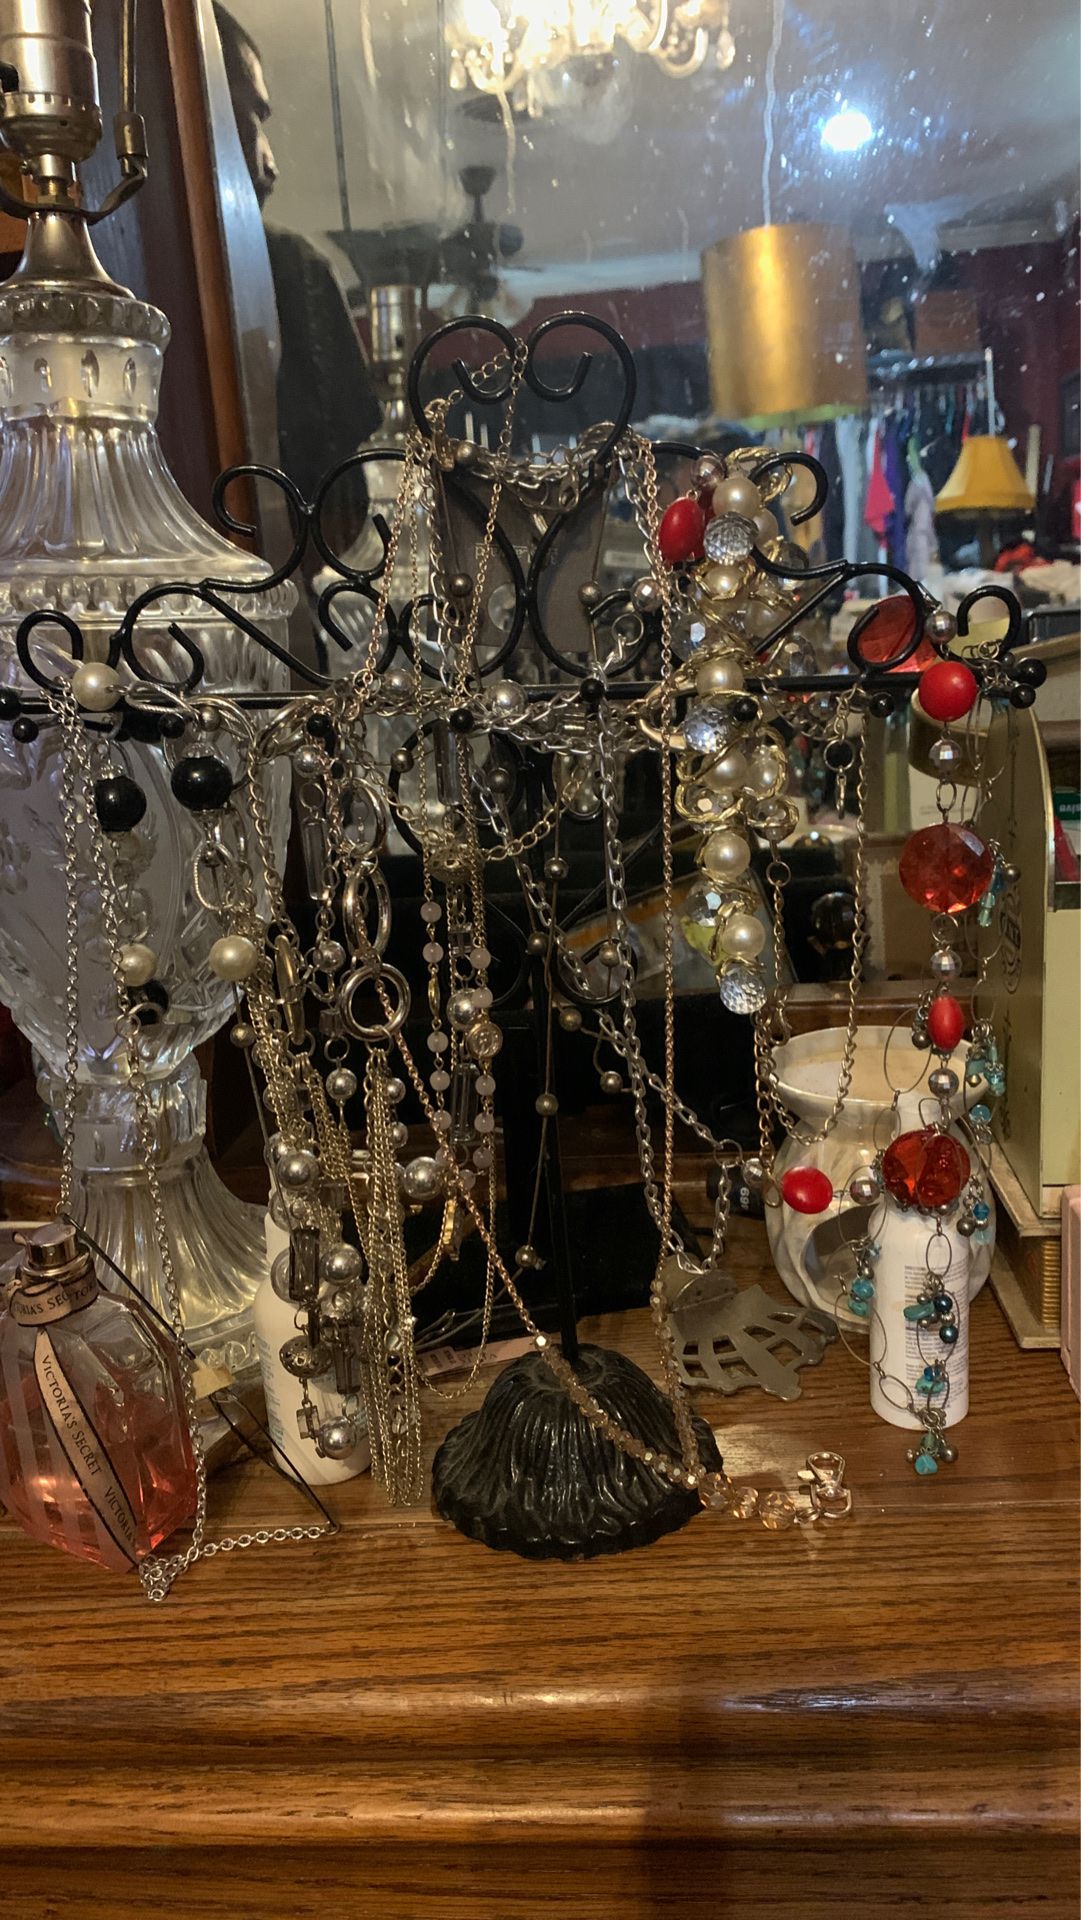 Necklaces all kinds and styles more than this